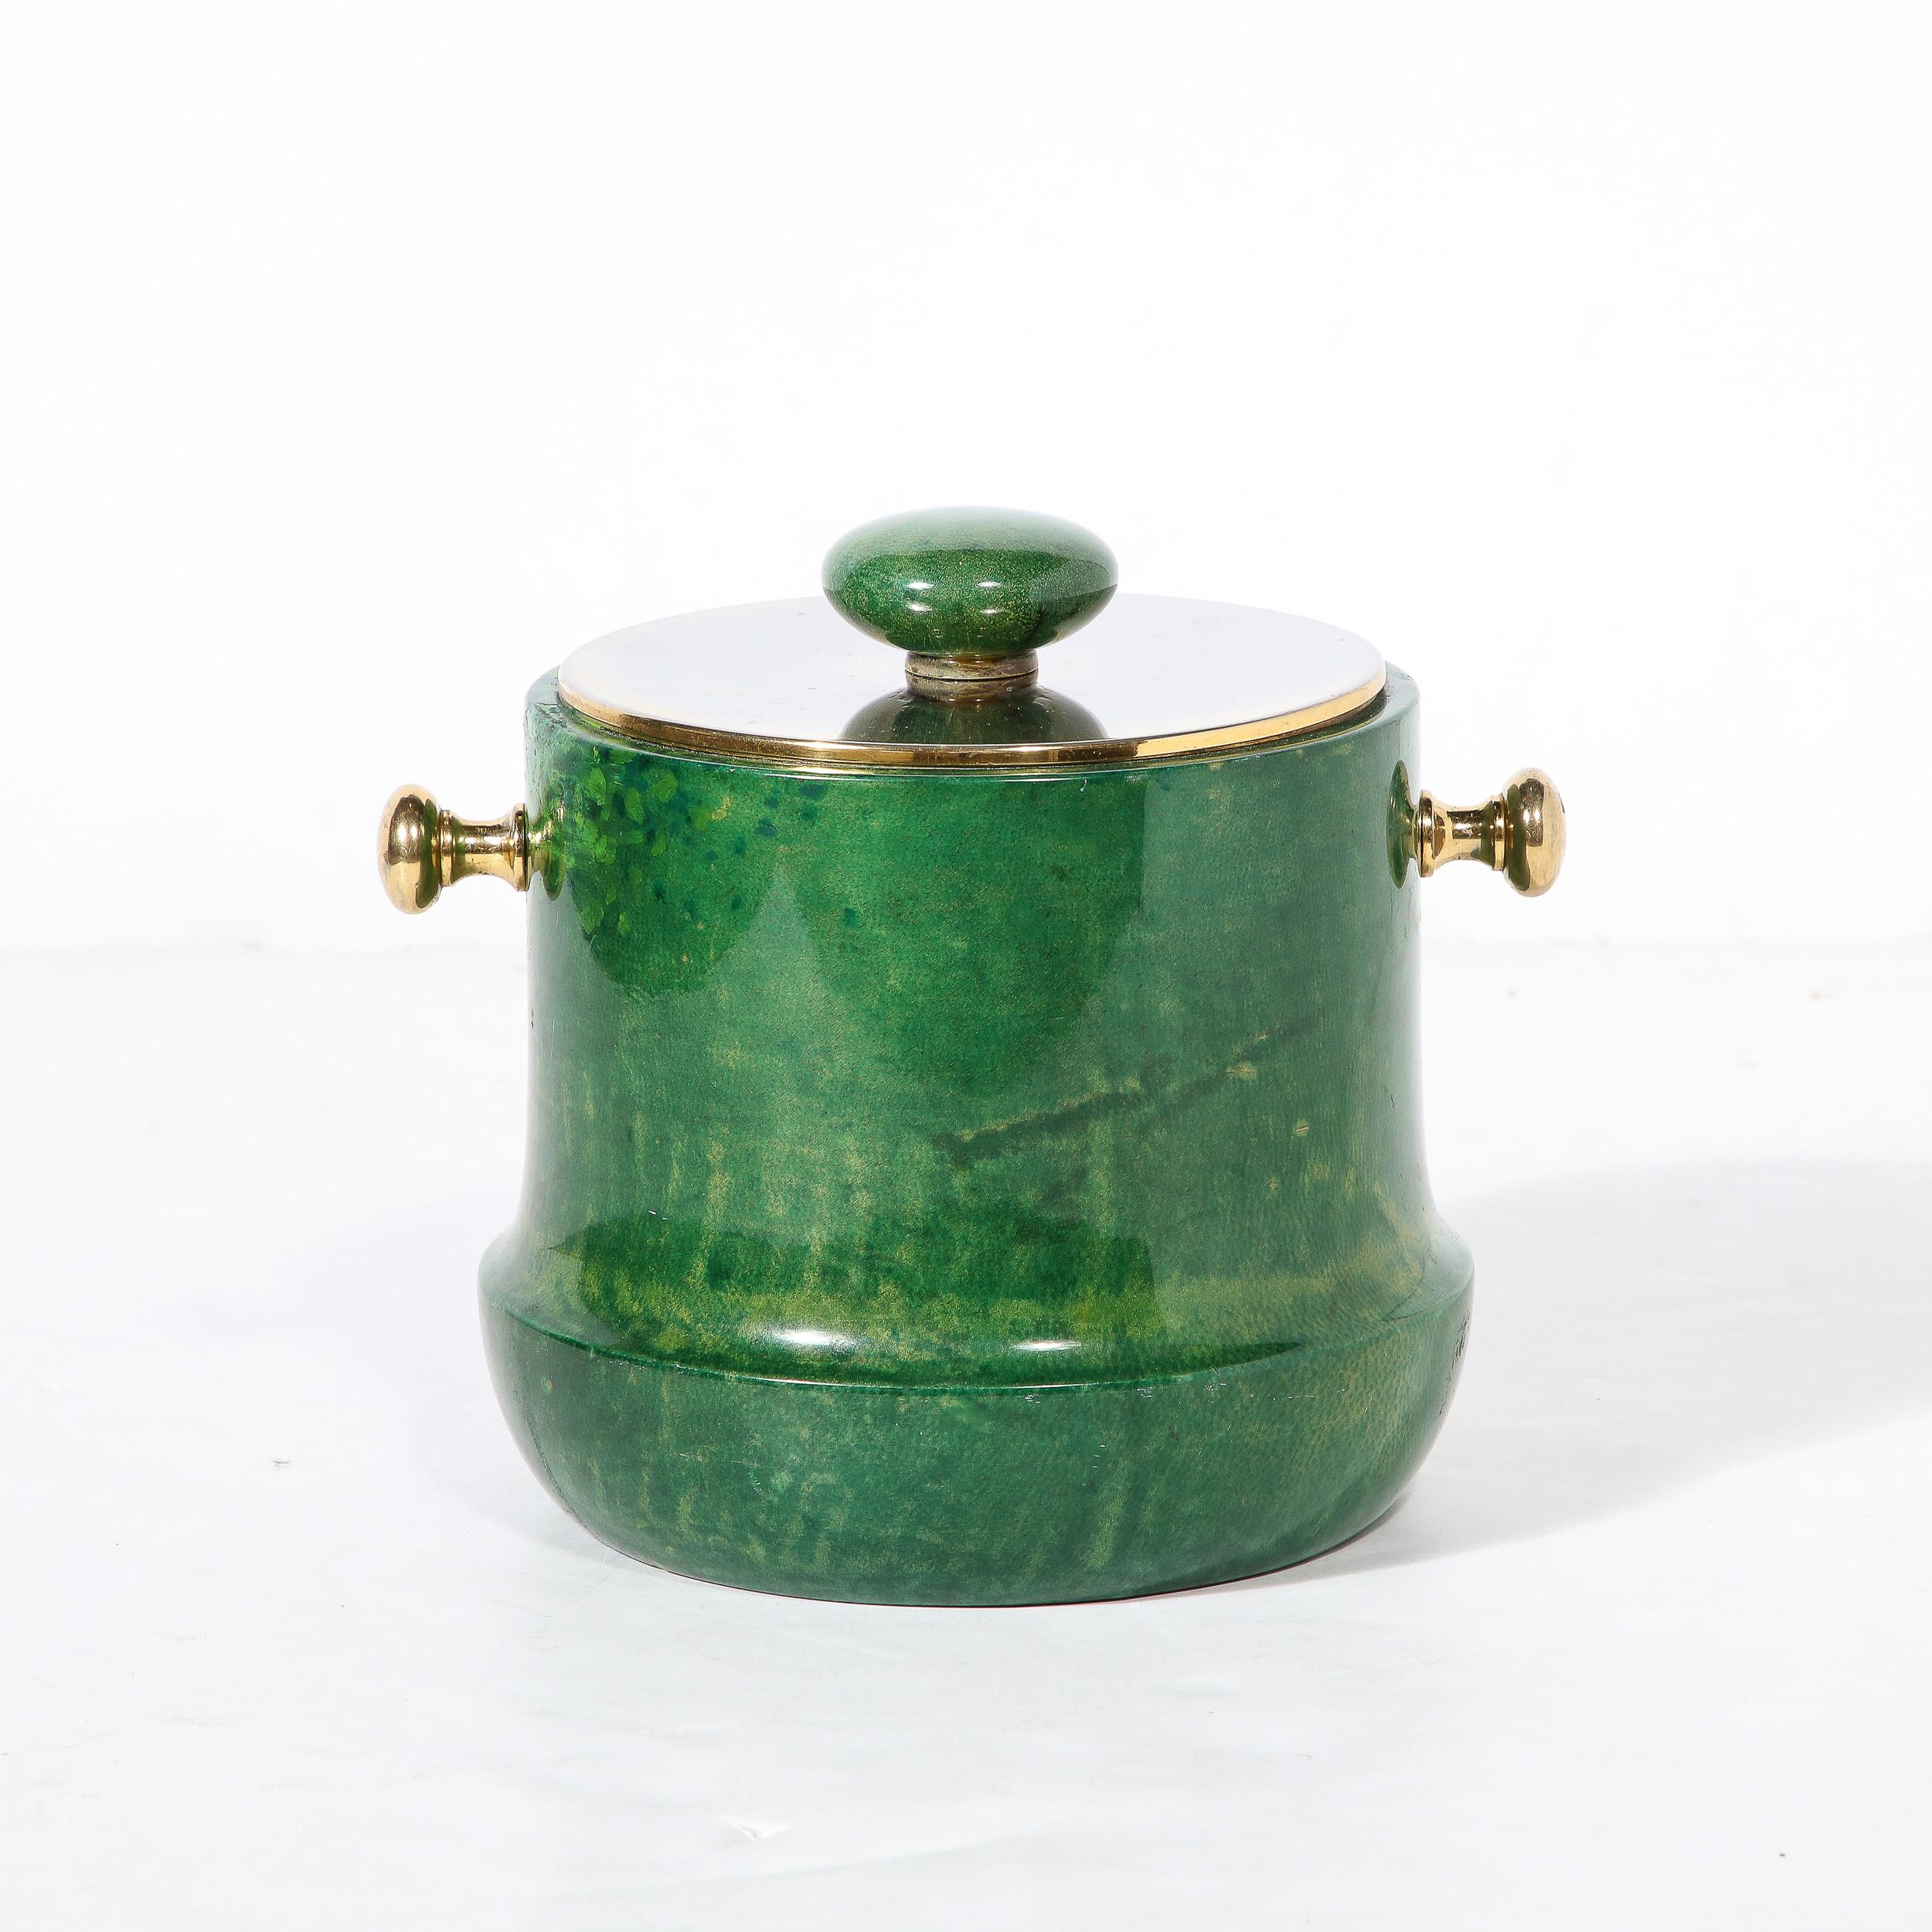 This gorgeous Mid-Century modernist Brass and Lacquered Viridian Goatskin Ice Bucket is by the esteemed artist and designer Aldo Tura, originating from Italy, Circa 1970. Features a beautiful profile slightly wider at the base giving an excellent